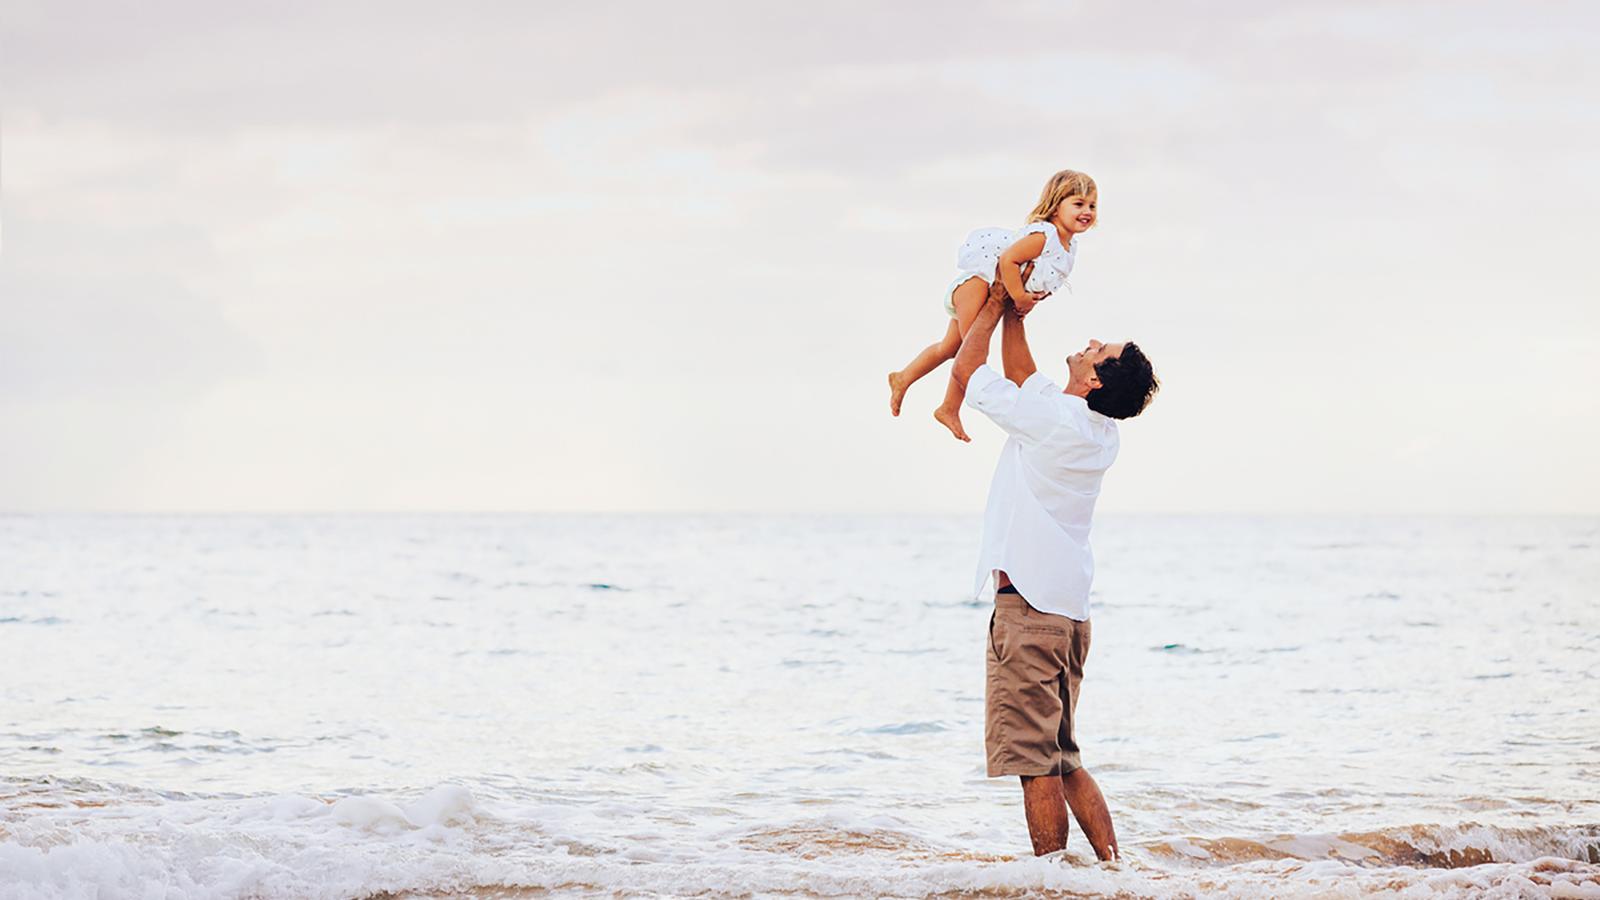 A man lifts up a young girl on the beach